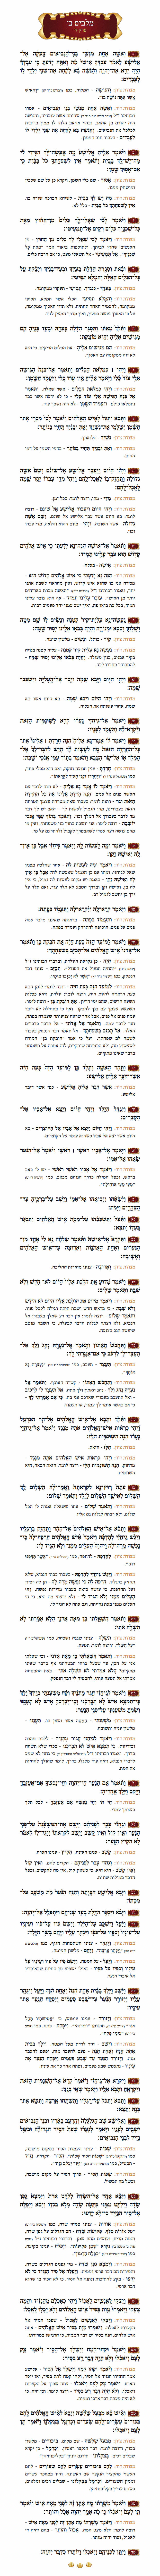 Sefer Melachim 2 Chapter 4 with commentary